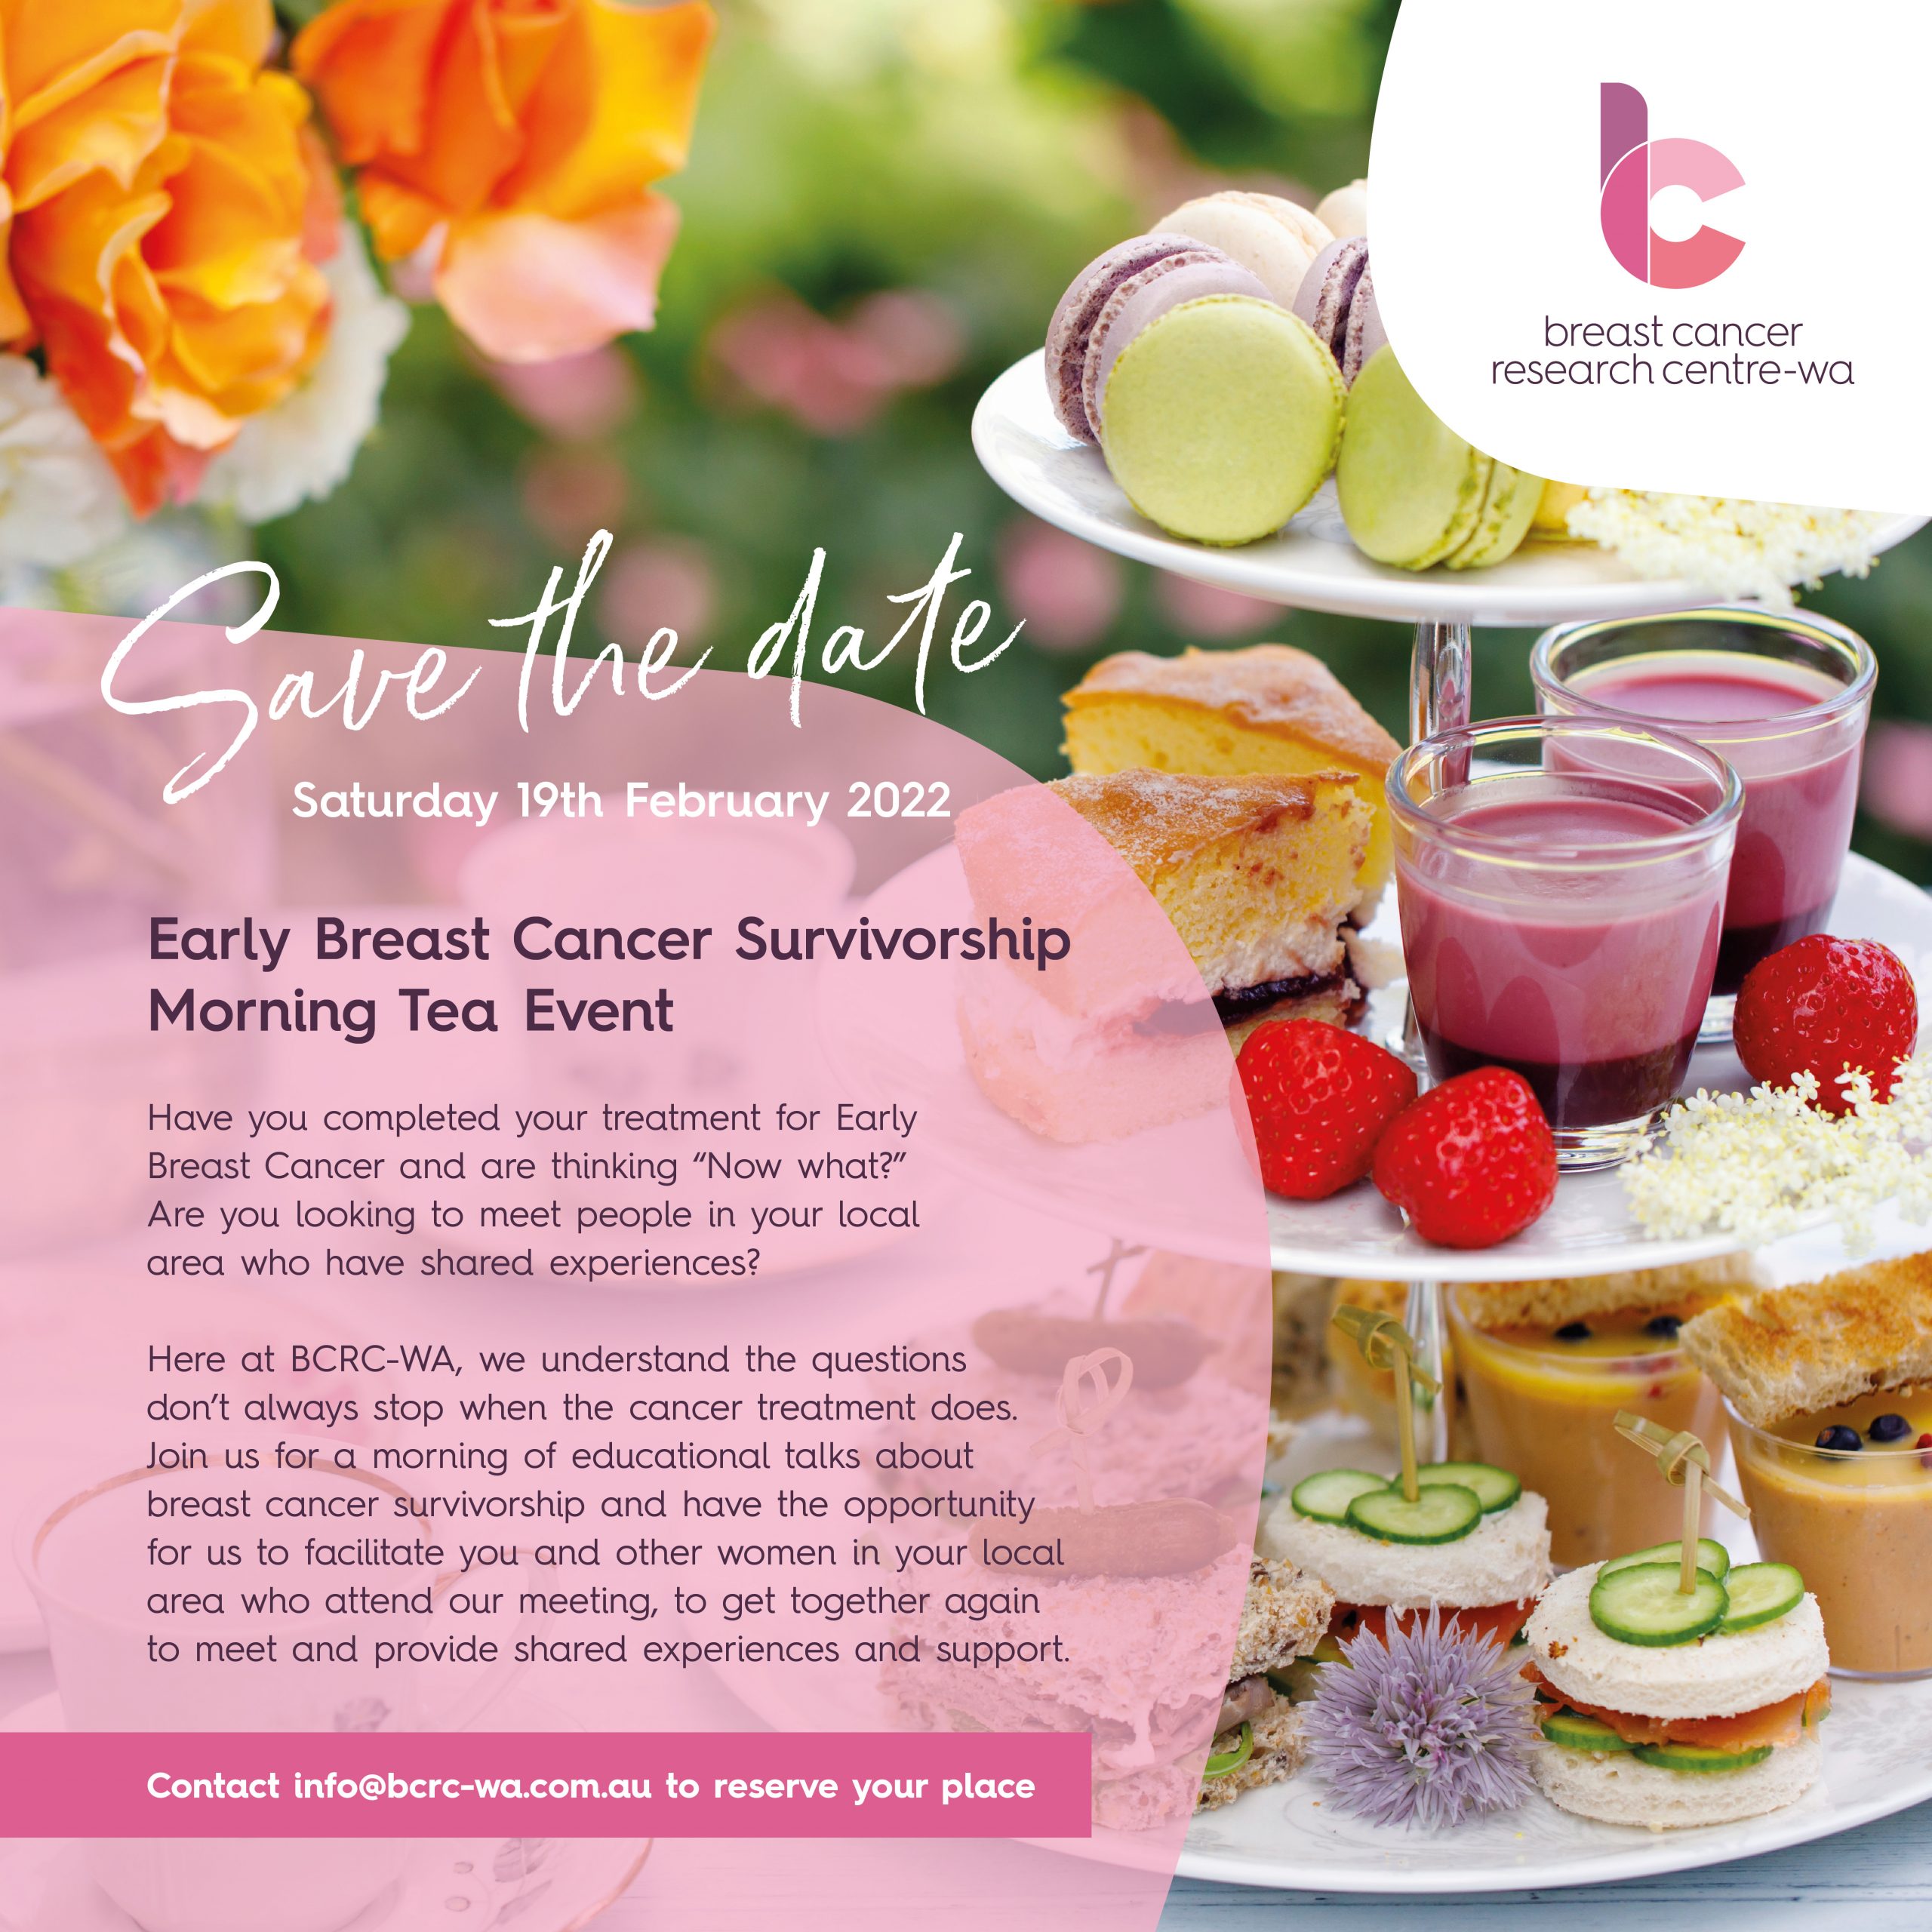 Early Breast Cancer Survivorship Morning Tea Event